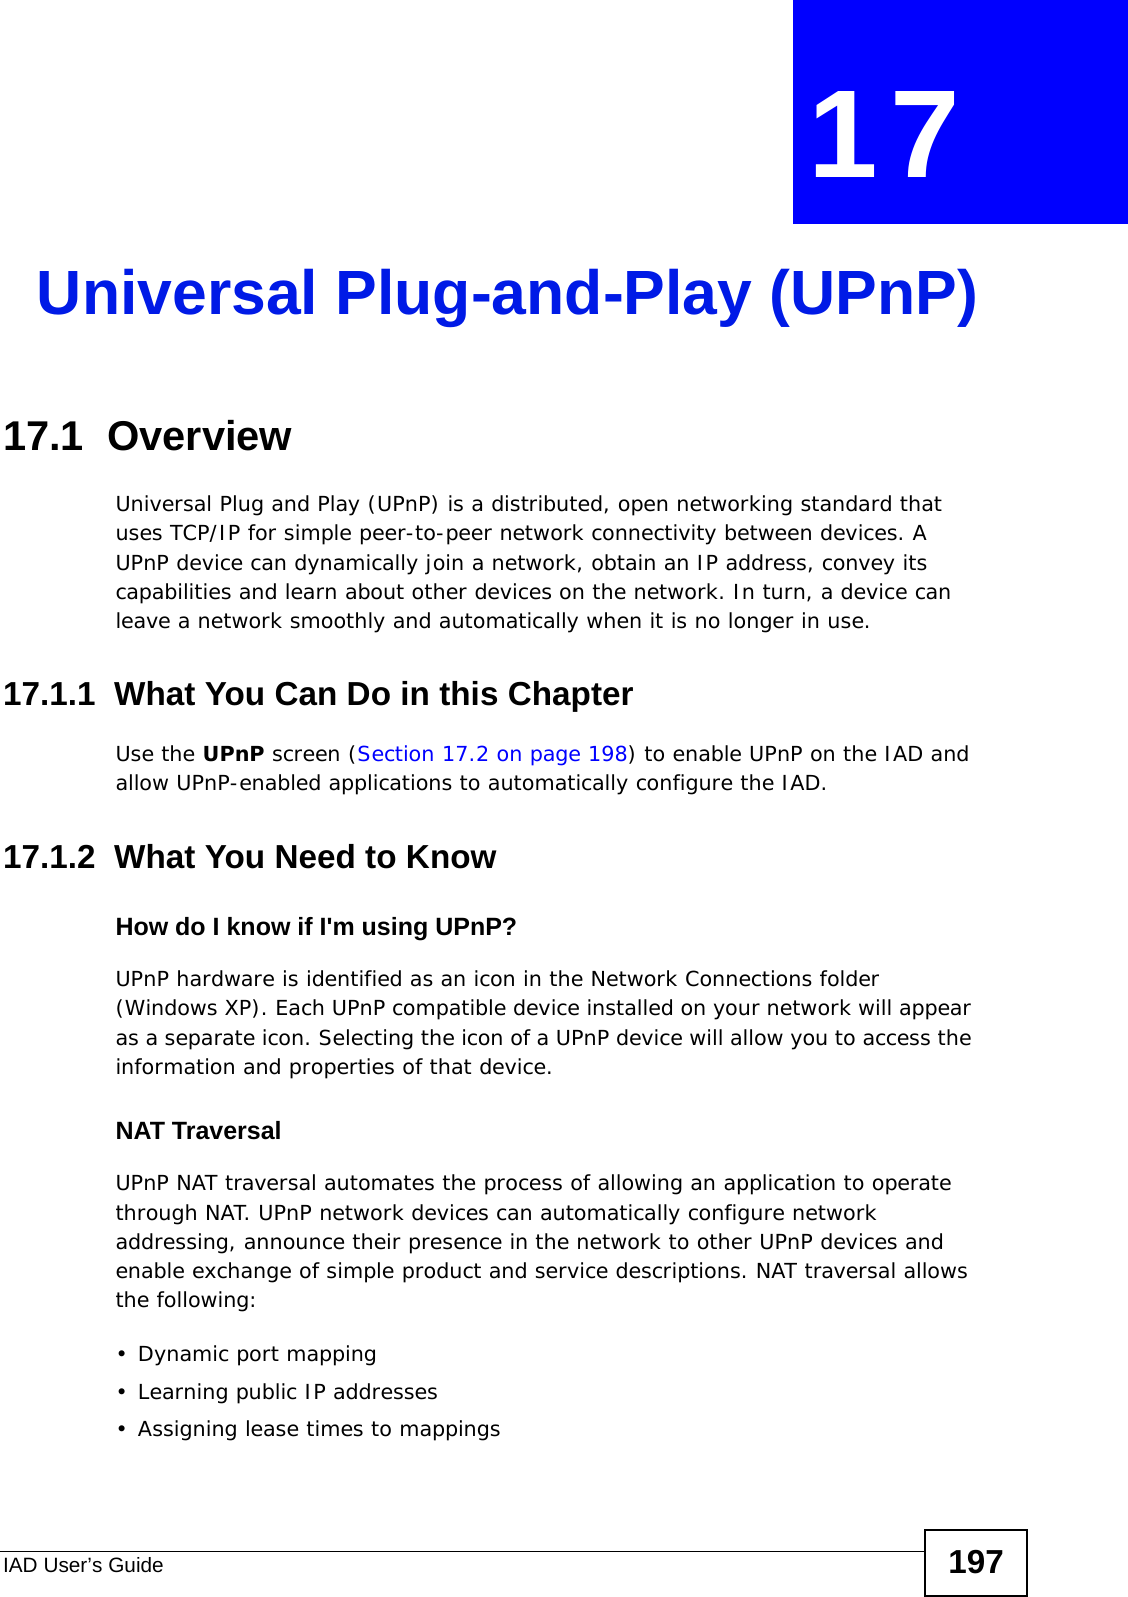 IAD User’s Guide 197CHAPTER  17 Universal Plug-and-Play (UPnP)17.1  Overview Universal Plug and Play (UPnP) is a distributed, open networking standard that uses TCP/IP for simple peer-to-peer network connectivity between devices. A UPnP device can dynamically join a network, obtain an IP address, convey its capabilities and learn about other devices on the network. In turn, a device can leave a network smoothly and automatically when it is no longer in use.17.1.1  What You Can Do in this ChapterUse the UPnP screen (Section 17.2 on page 198) to enable UPnP on the IAD and allow UPnP-enabled applications to automatically configure the IAD.17.1.2  What You Need to KnowHow do I know if I&apos;m using UPnP? UPnP hardware is identified as an icon in the Network Connections folder (Windows XP). Each UPnP compatible device installed on your network will appear as a separate icon. Selecting the icon of a UPnP device will allow you to access the information and properties of that device. NAT TraversalUPnP NAT traversal automates the process of allowing an application to operate through NAT. UPnP network devices can automatically configure network addressing, announce their presence in the network to other UPnP devices and enable exchange of simple product and service descriptions. NAT traversal allows the following:• Dynamic port mapping• Learning public IP addresses• Assigning lease times to mappings